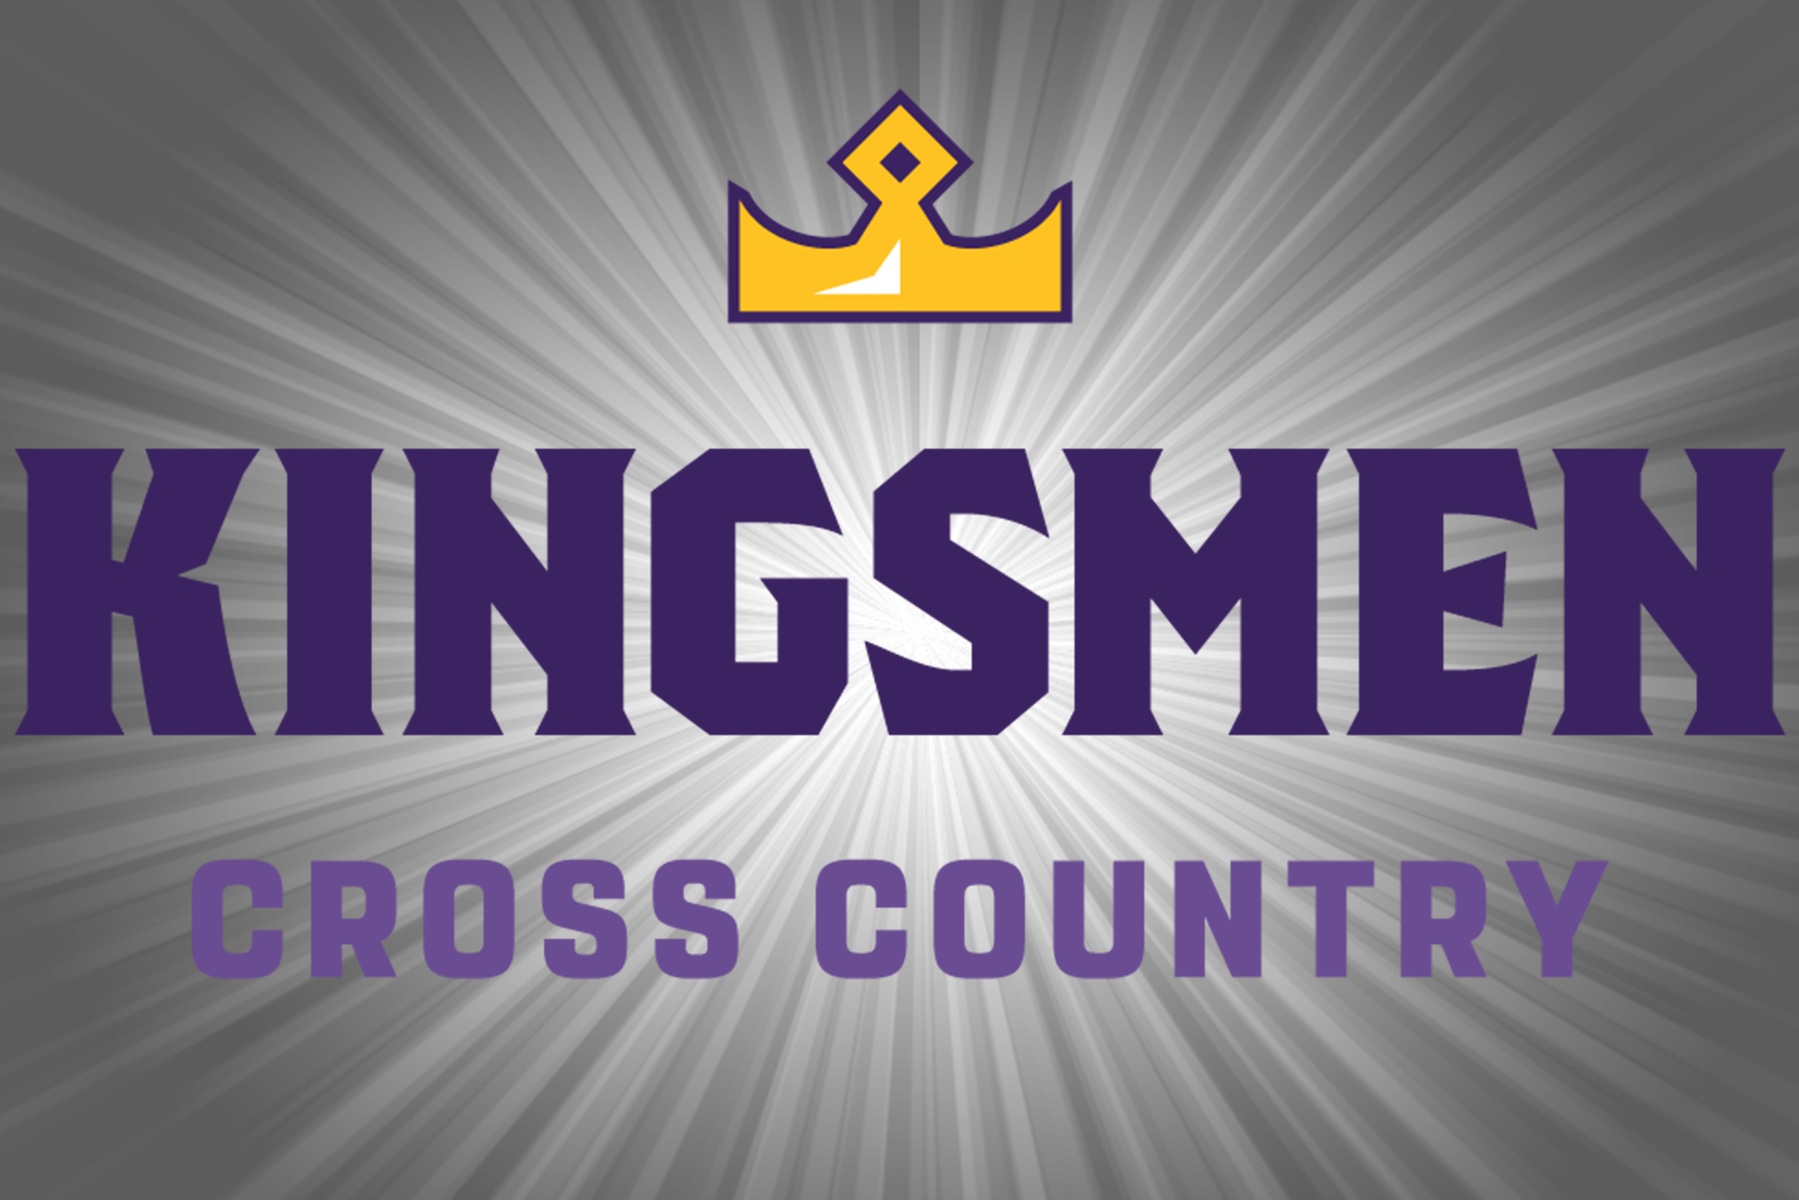 Kingsmen Set to Compete on Course in 2017